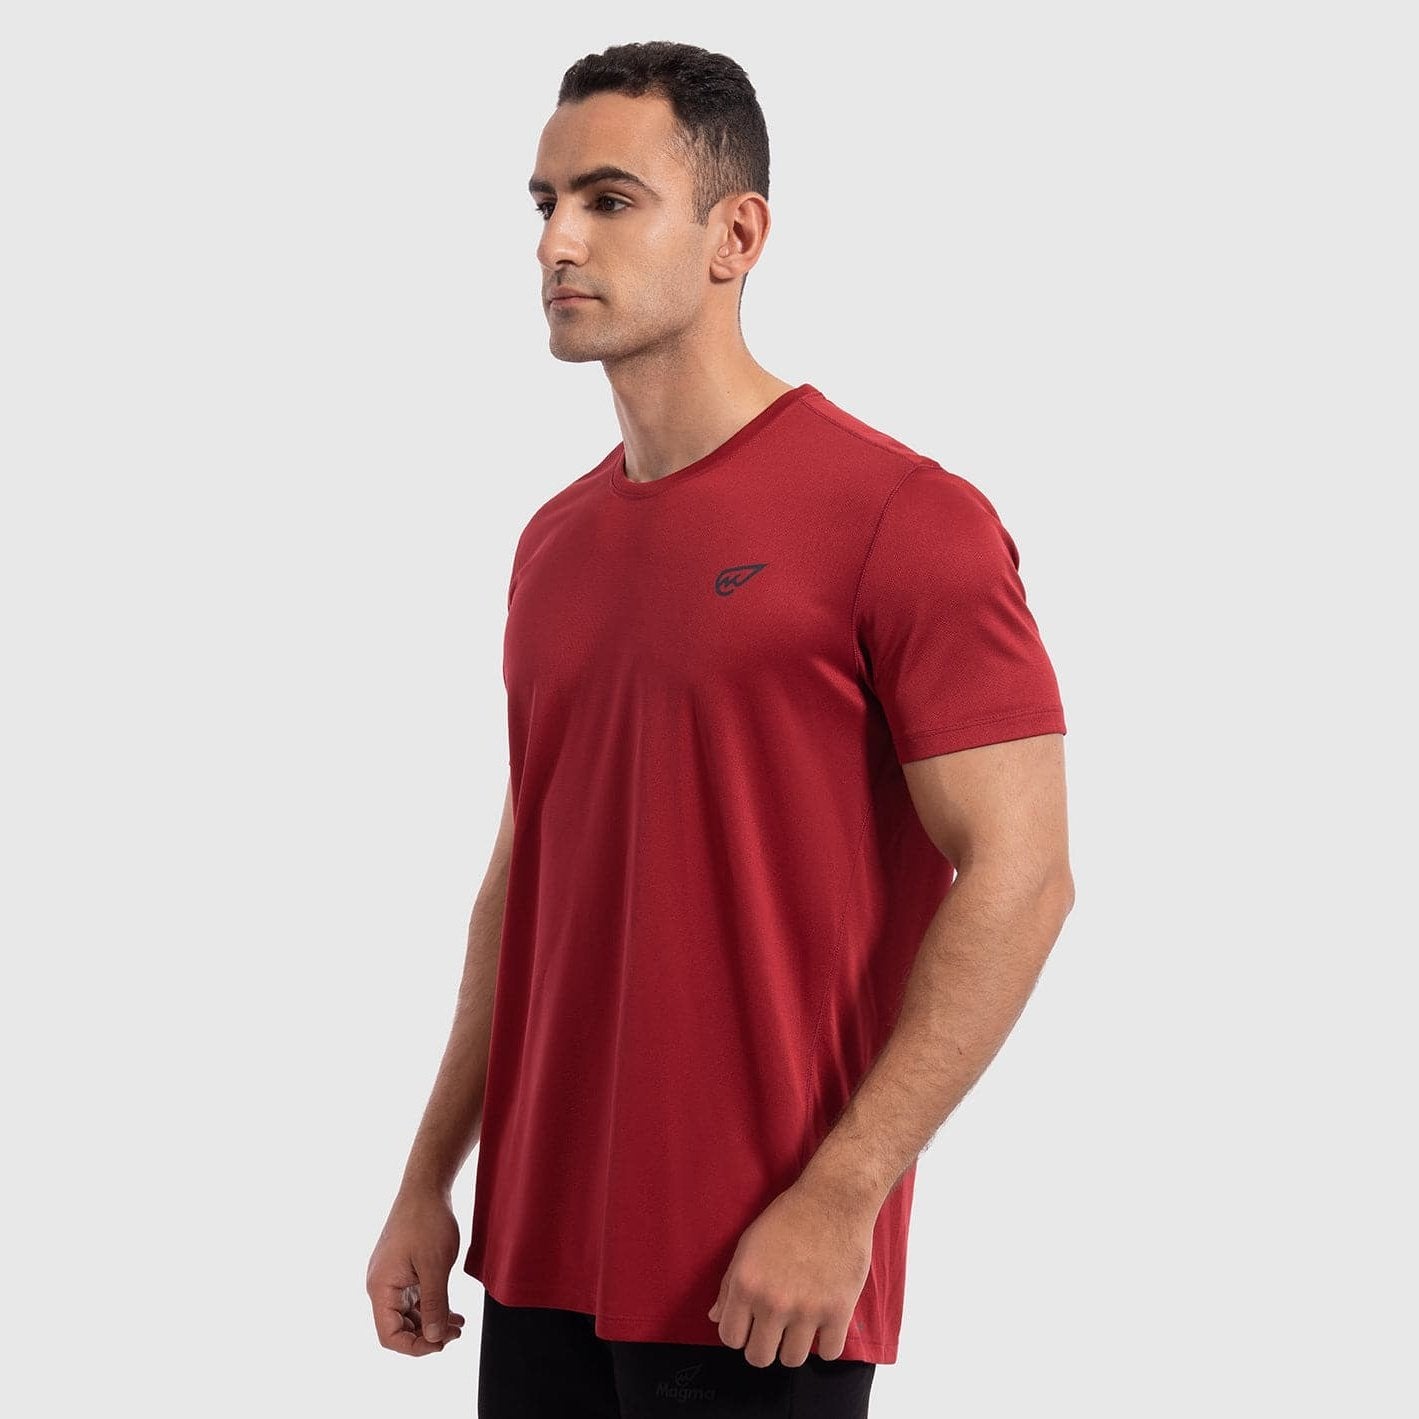 Training T-shirt in Red